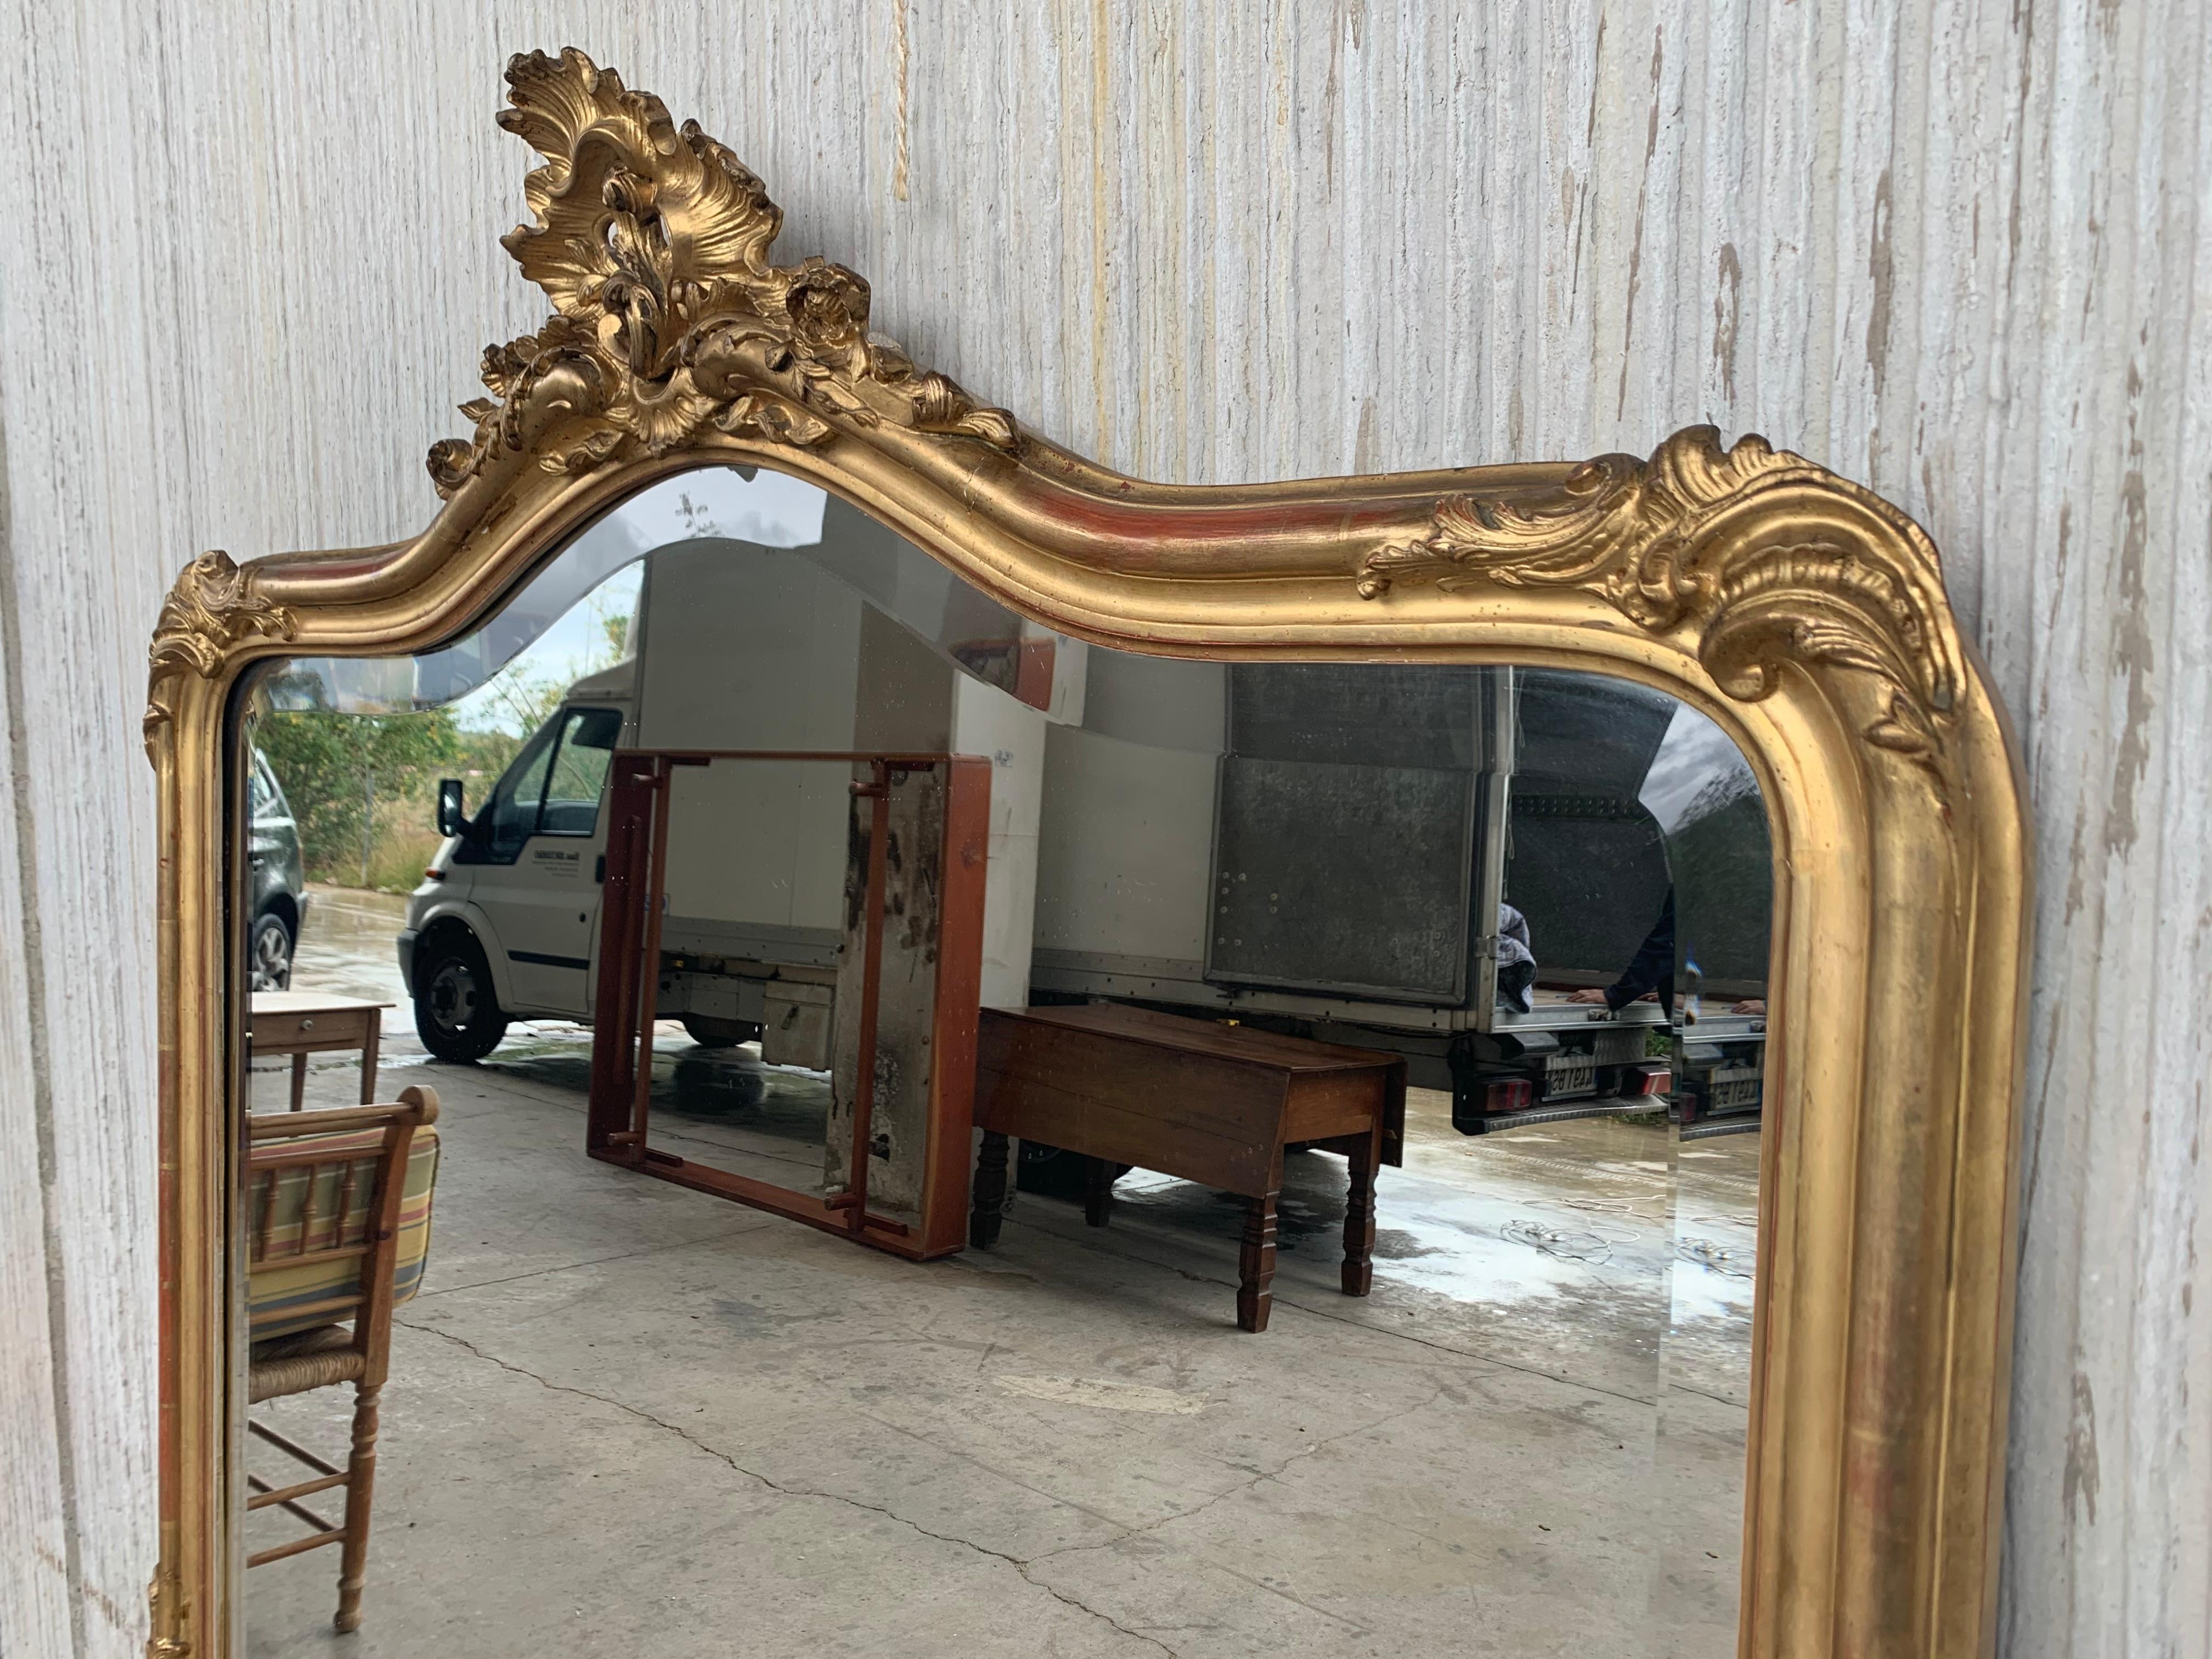 Regency 19th Century French Empire Period Carved Giltwood Rectangular Mirror with Crest